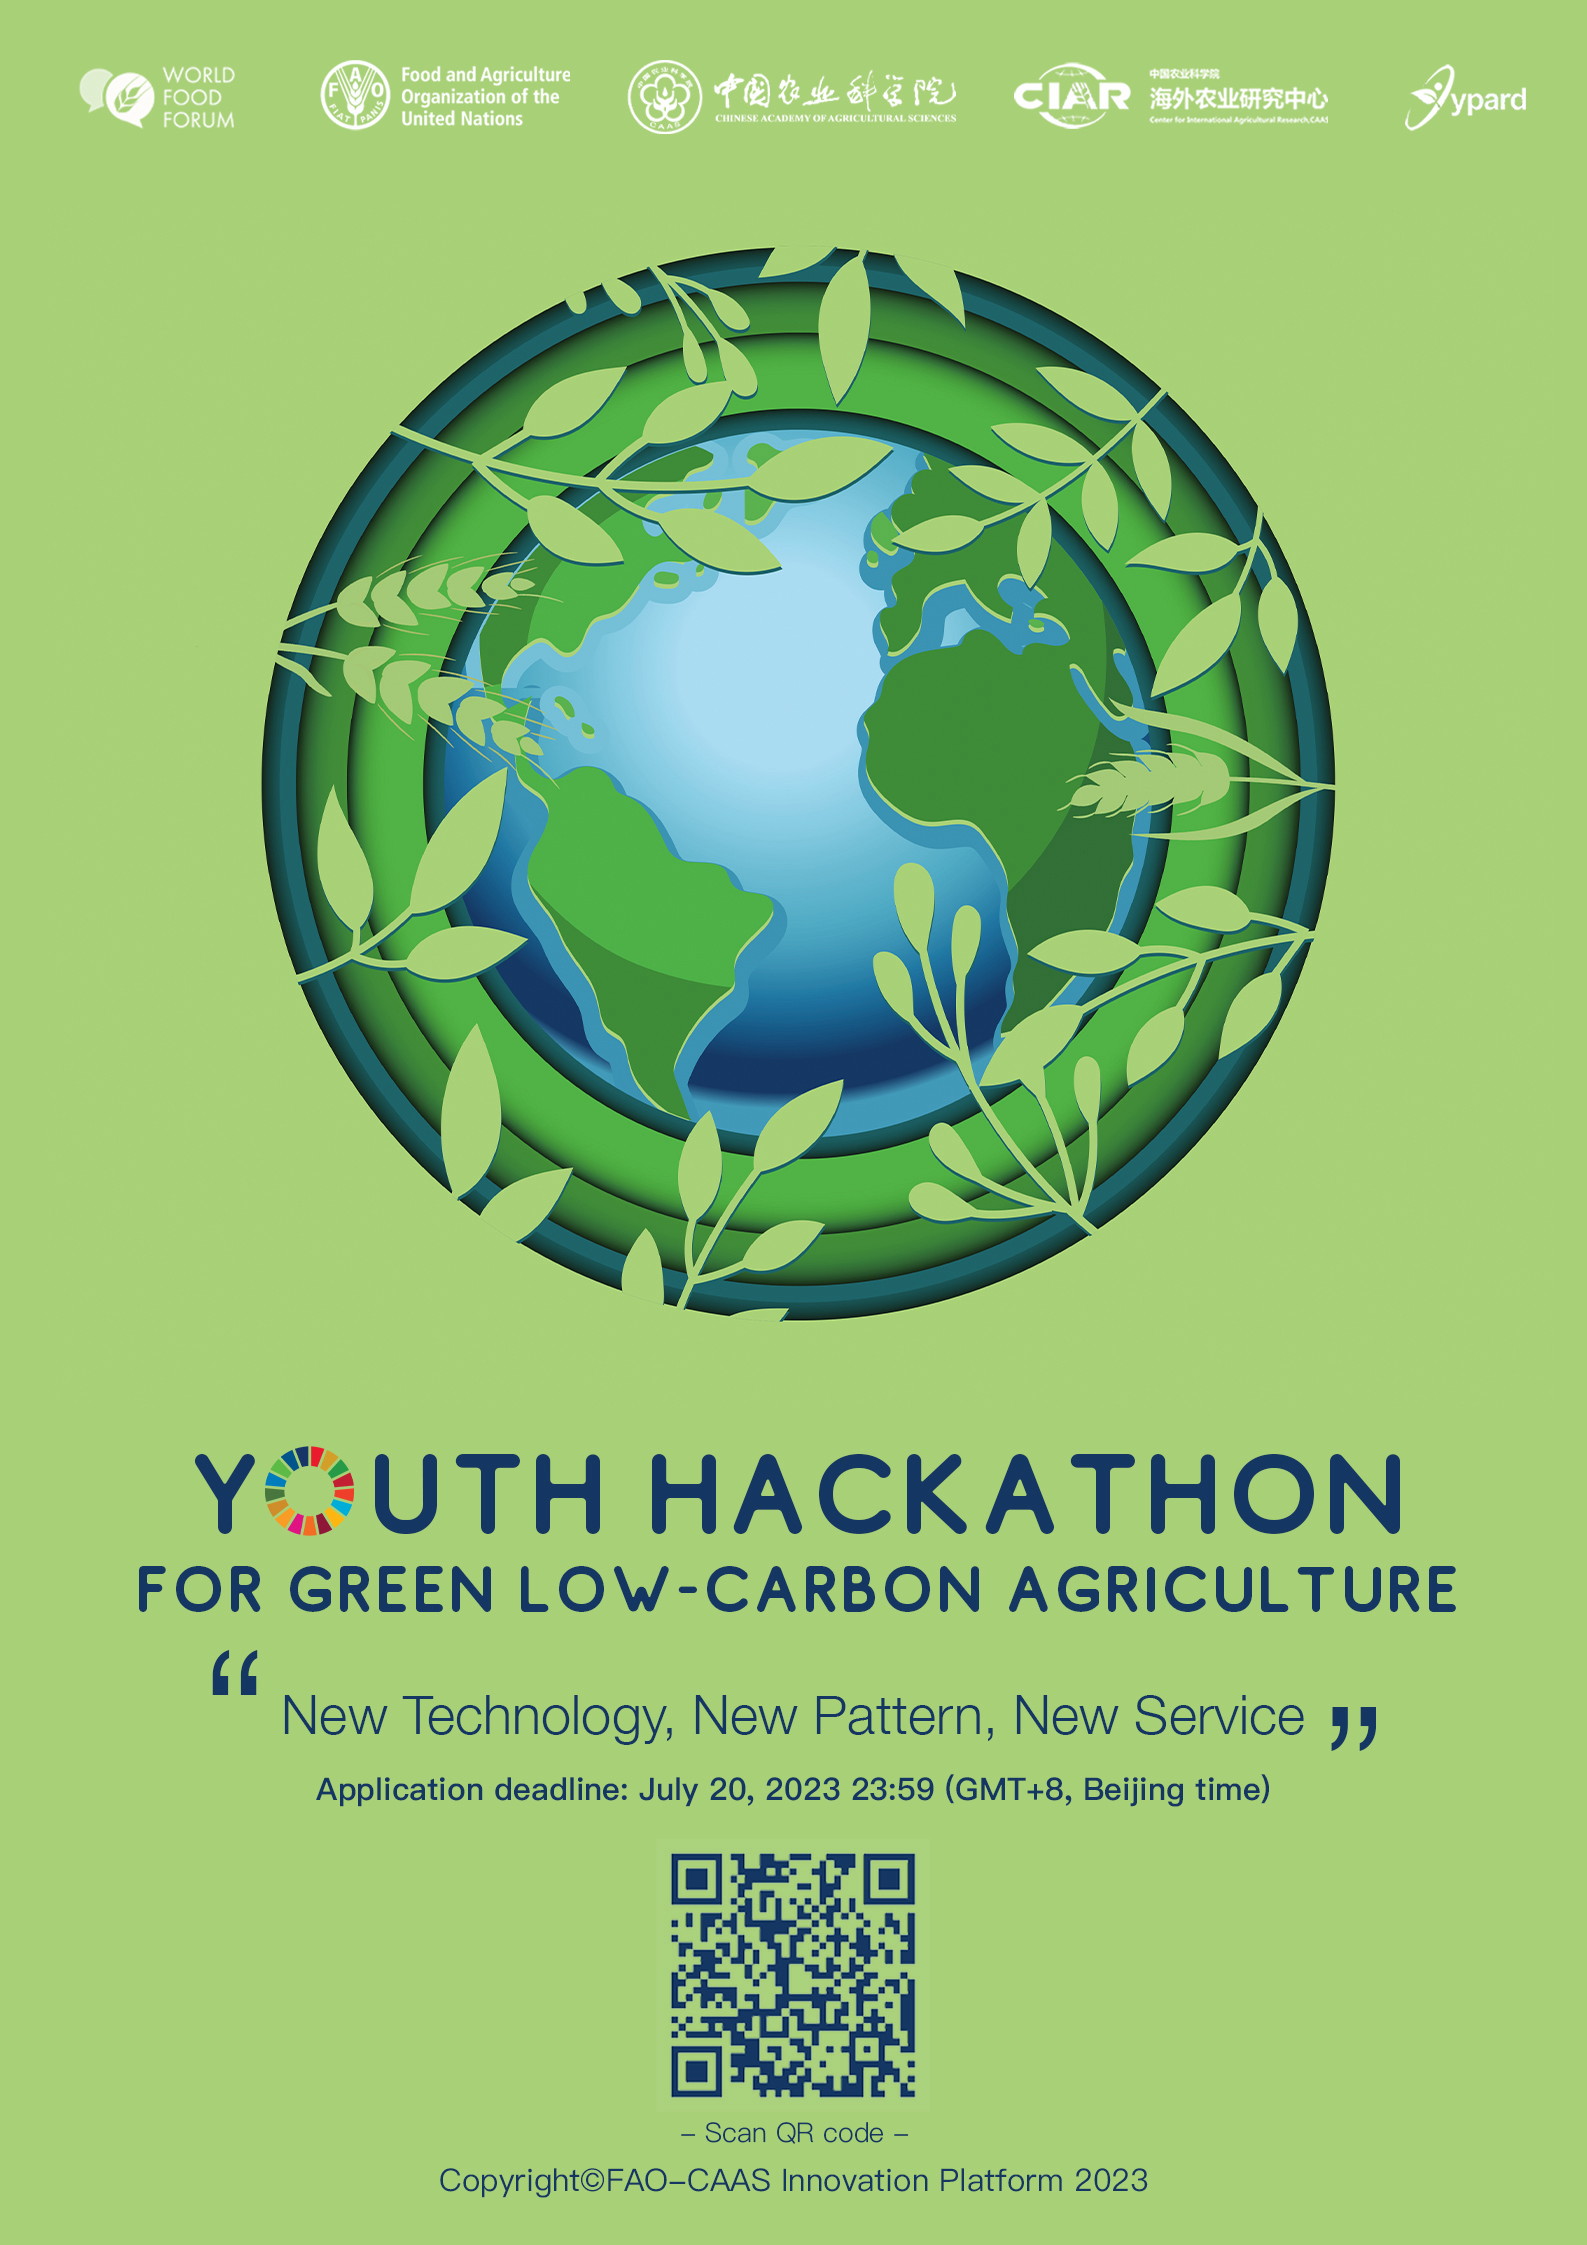 Call for Applications: 2023 Youth Hackathon for Green Low-Carbon Agriculture